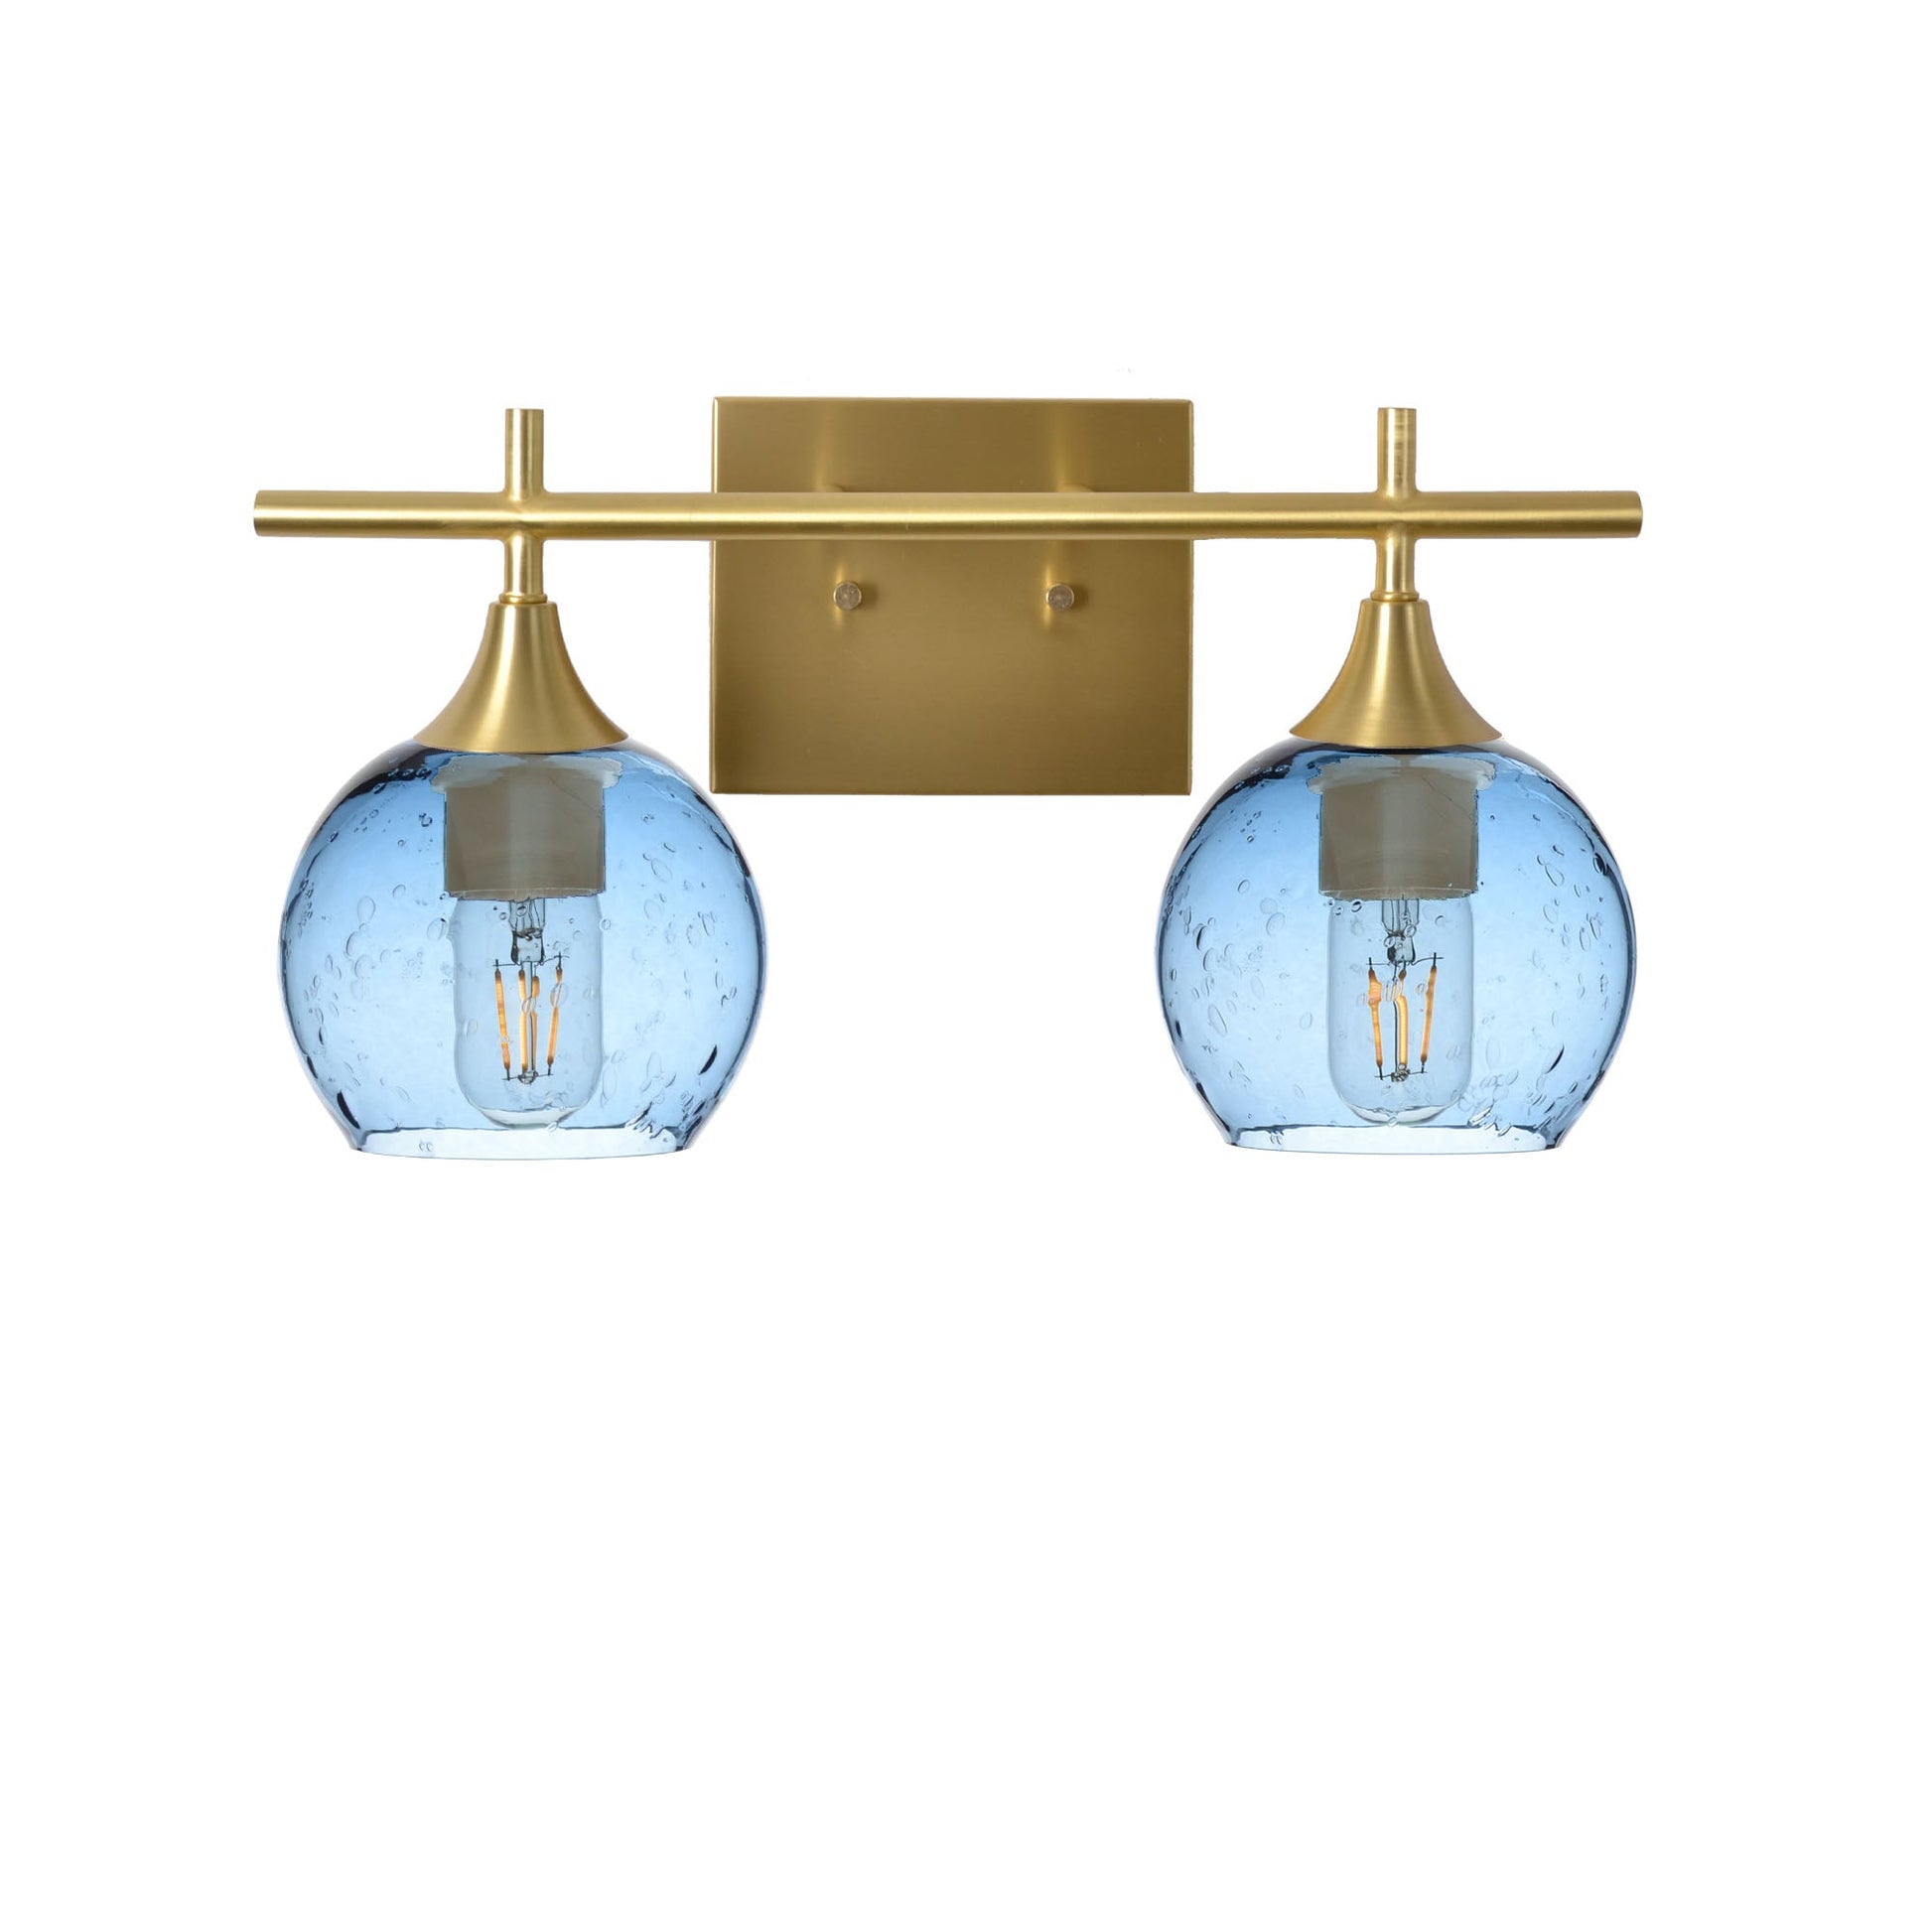 763 Lunar: 2 Light Wall Vanity-Glass-Bicycle Glass Co - Hotshop-Steel Blue-Satin Brass-Bicycle Glass Co